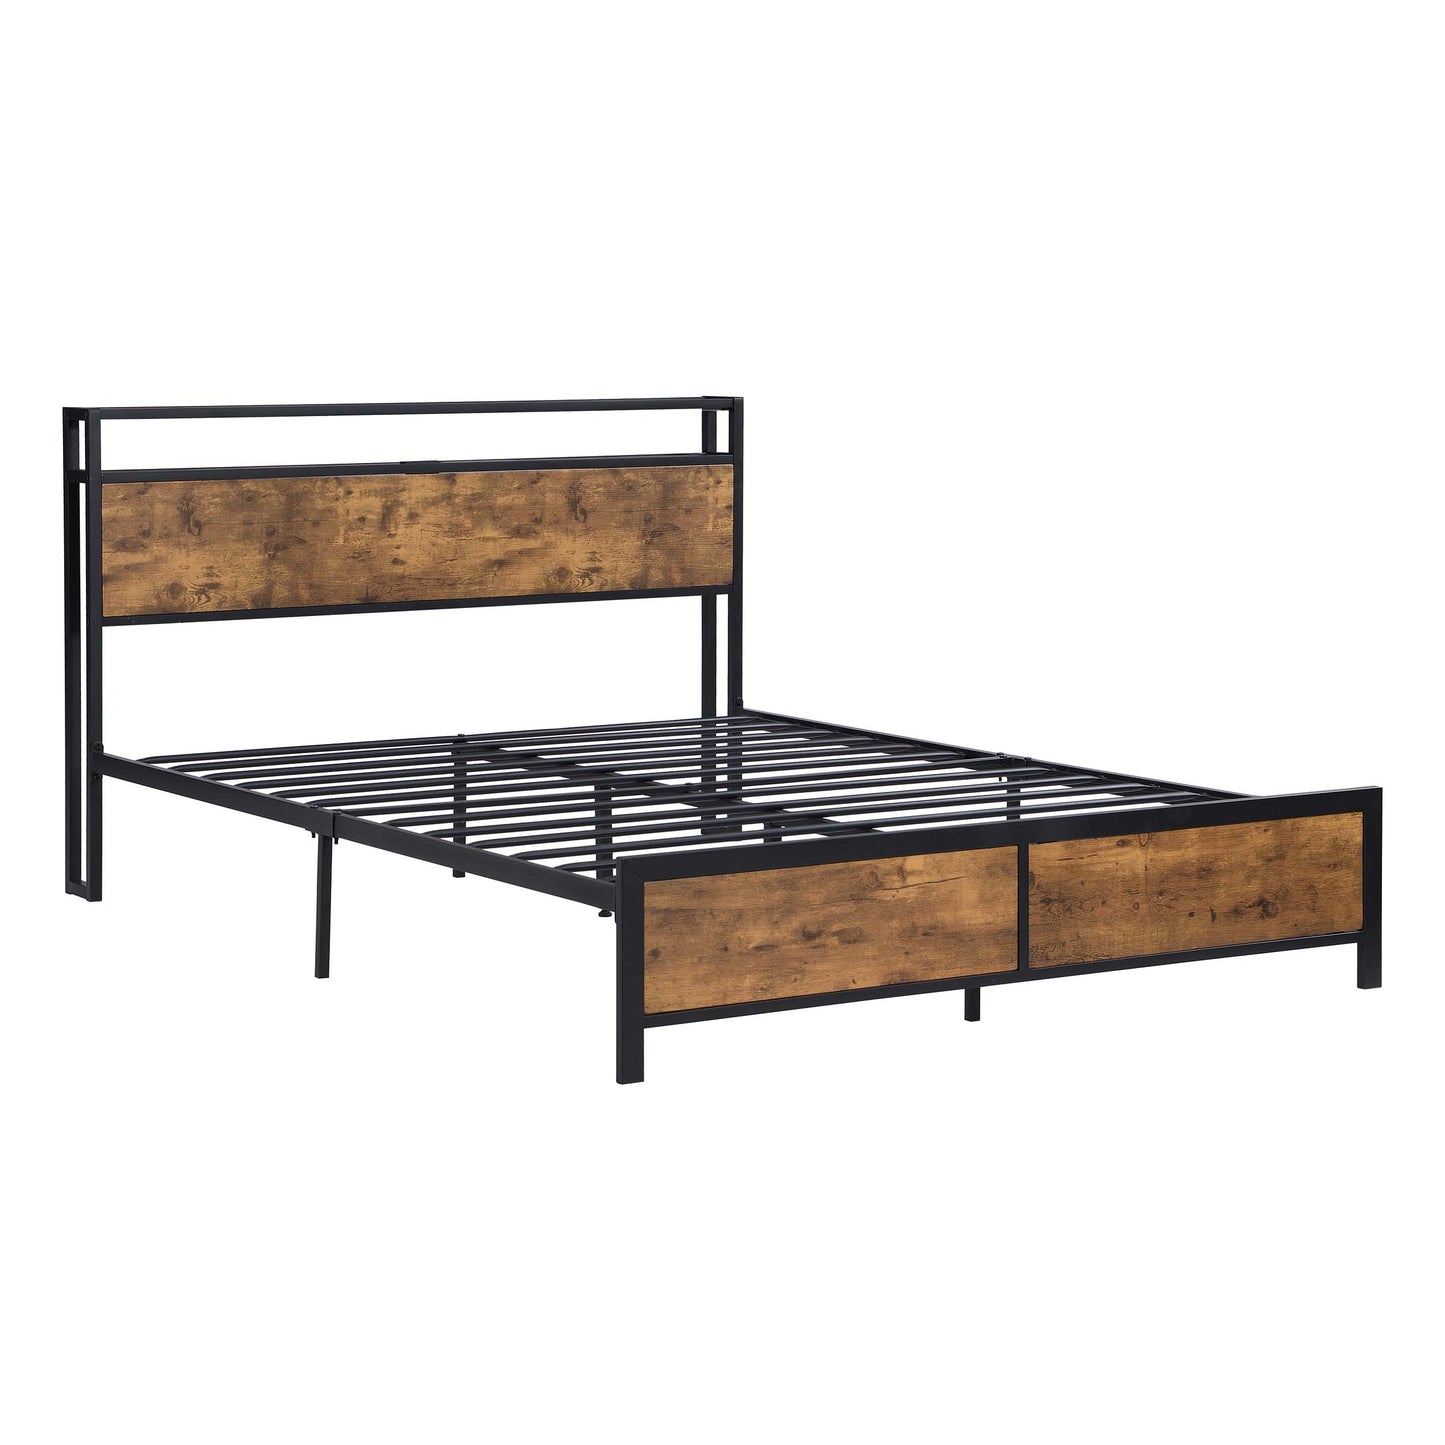 SYNGAR Platform Bed Frame Queen Size with Wooden Storage Headboard, LED Lights and USB Ports, Industrial Metal Queen Bed Frame with Slat Support, Noise Free, No Box Spring Needed, Rustic Brown